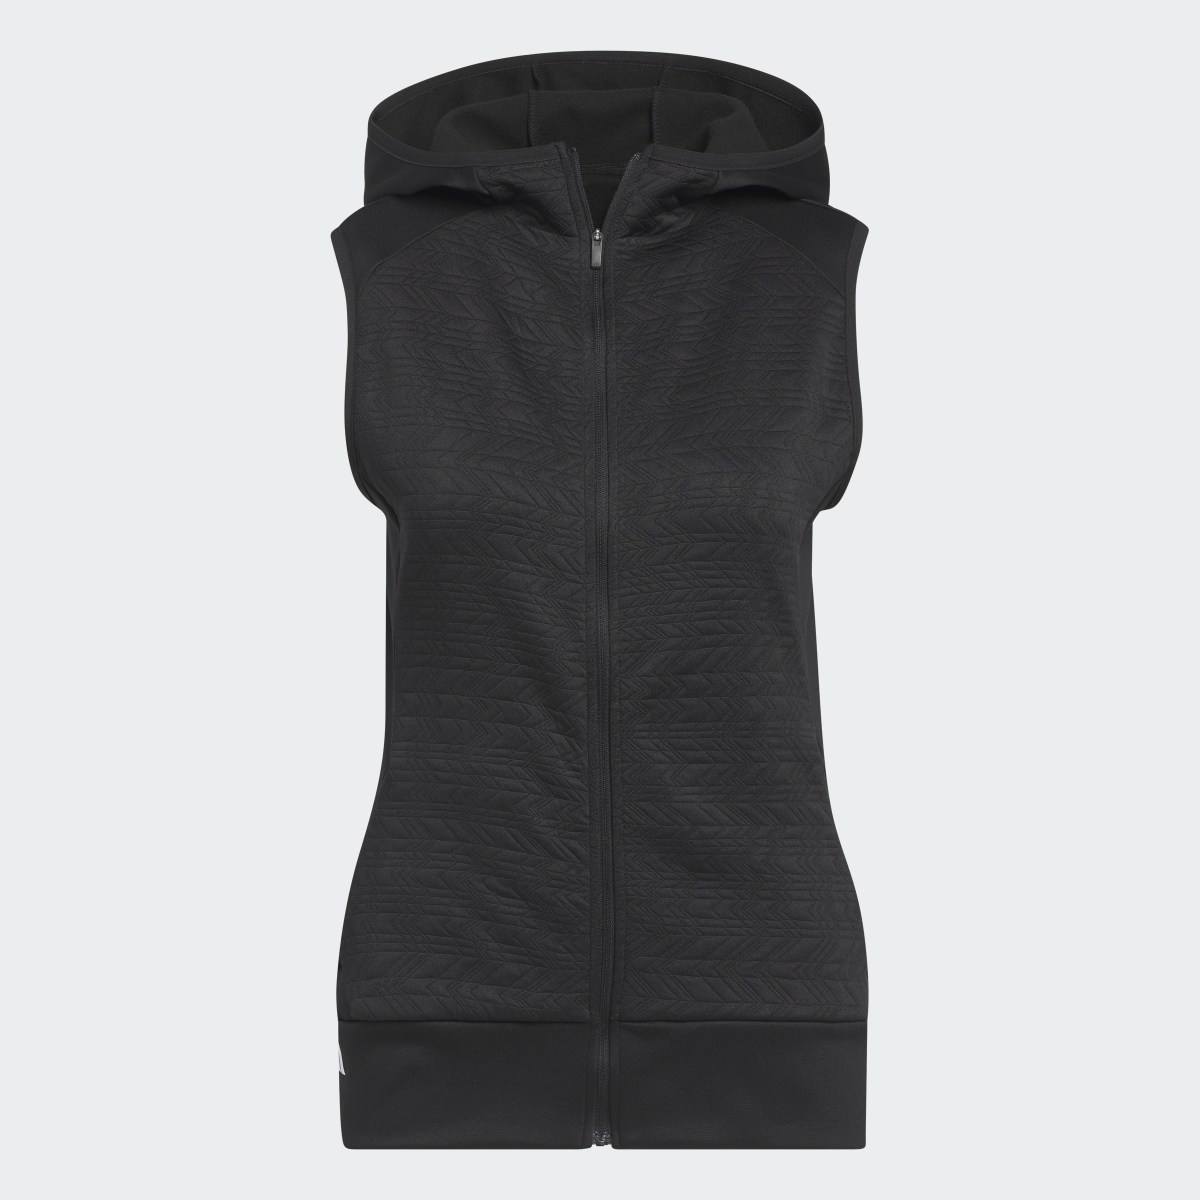 Adidas COLD.RDY Full-Zip Vest. 5